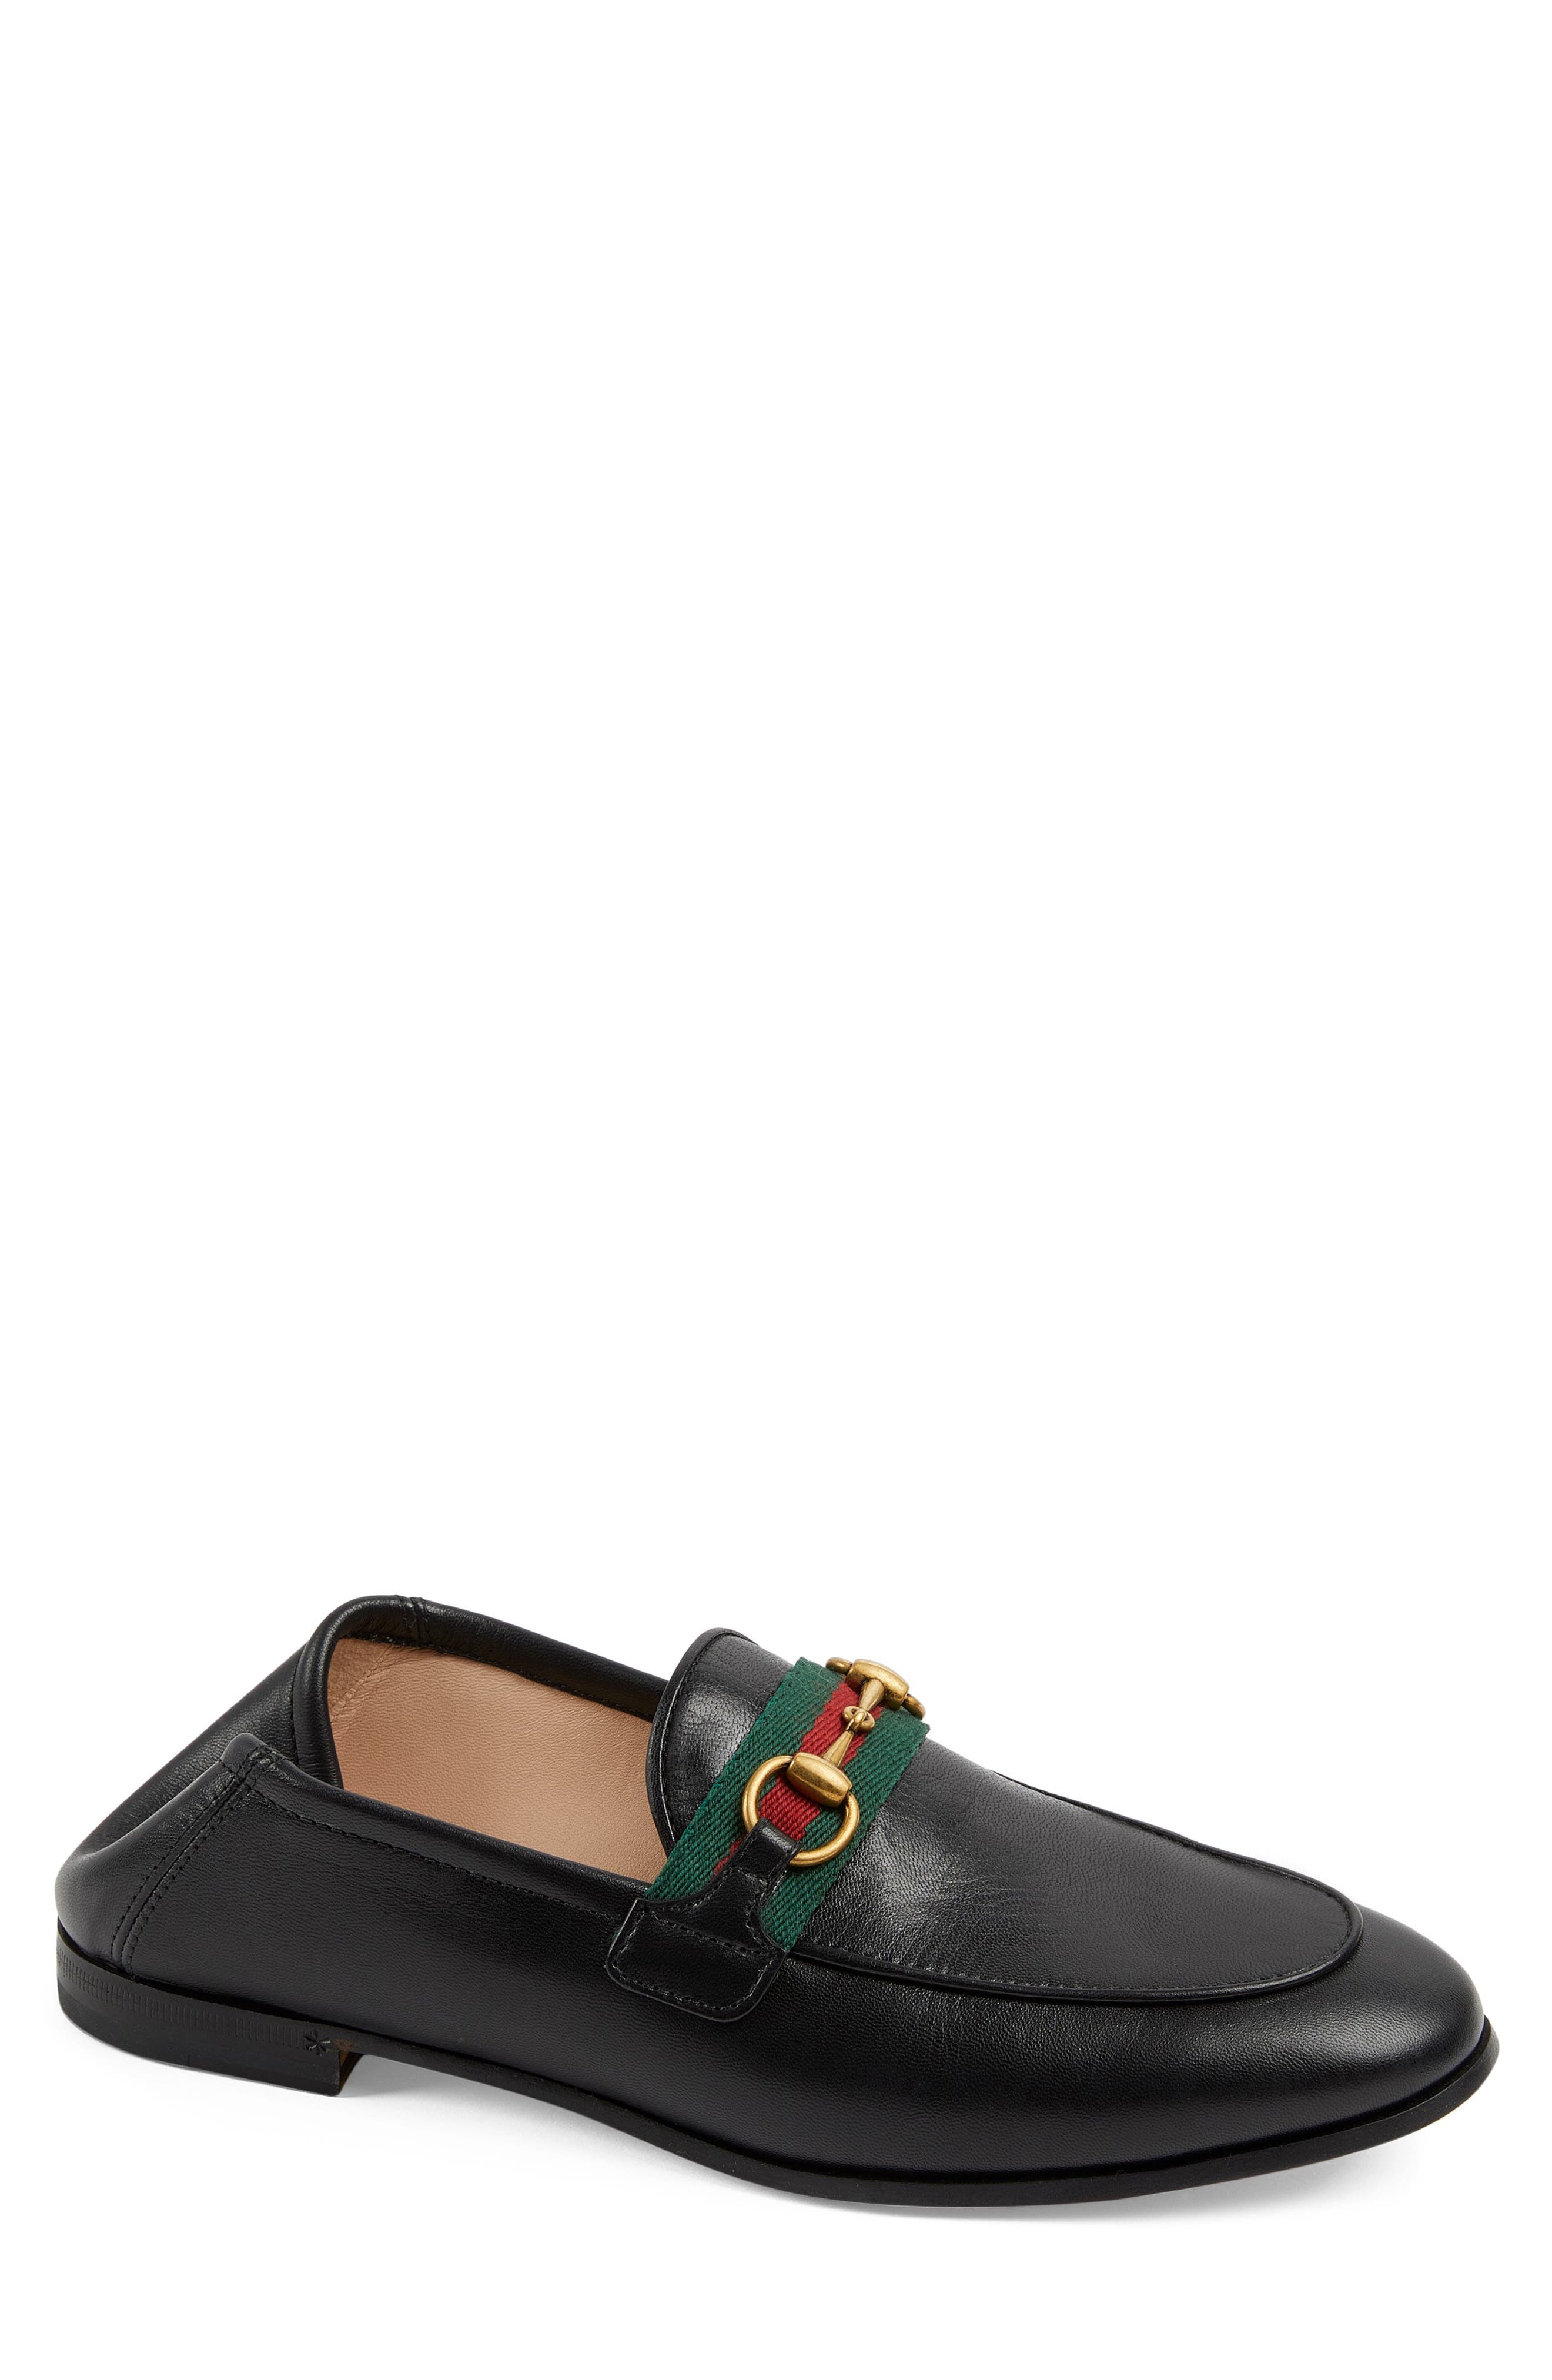 gucci brixton loafer